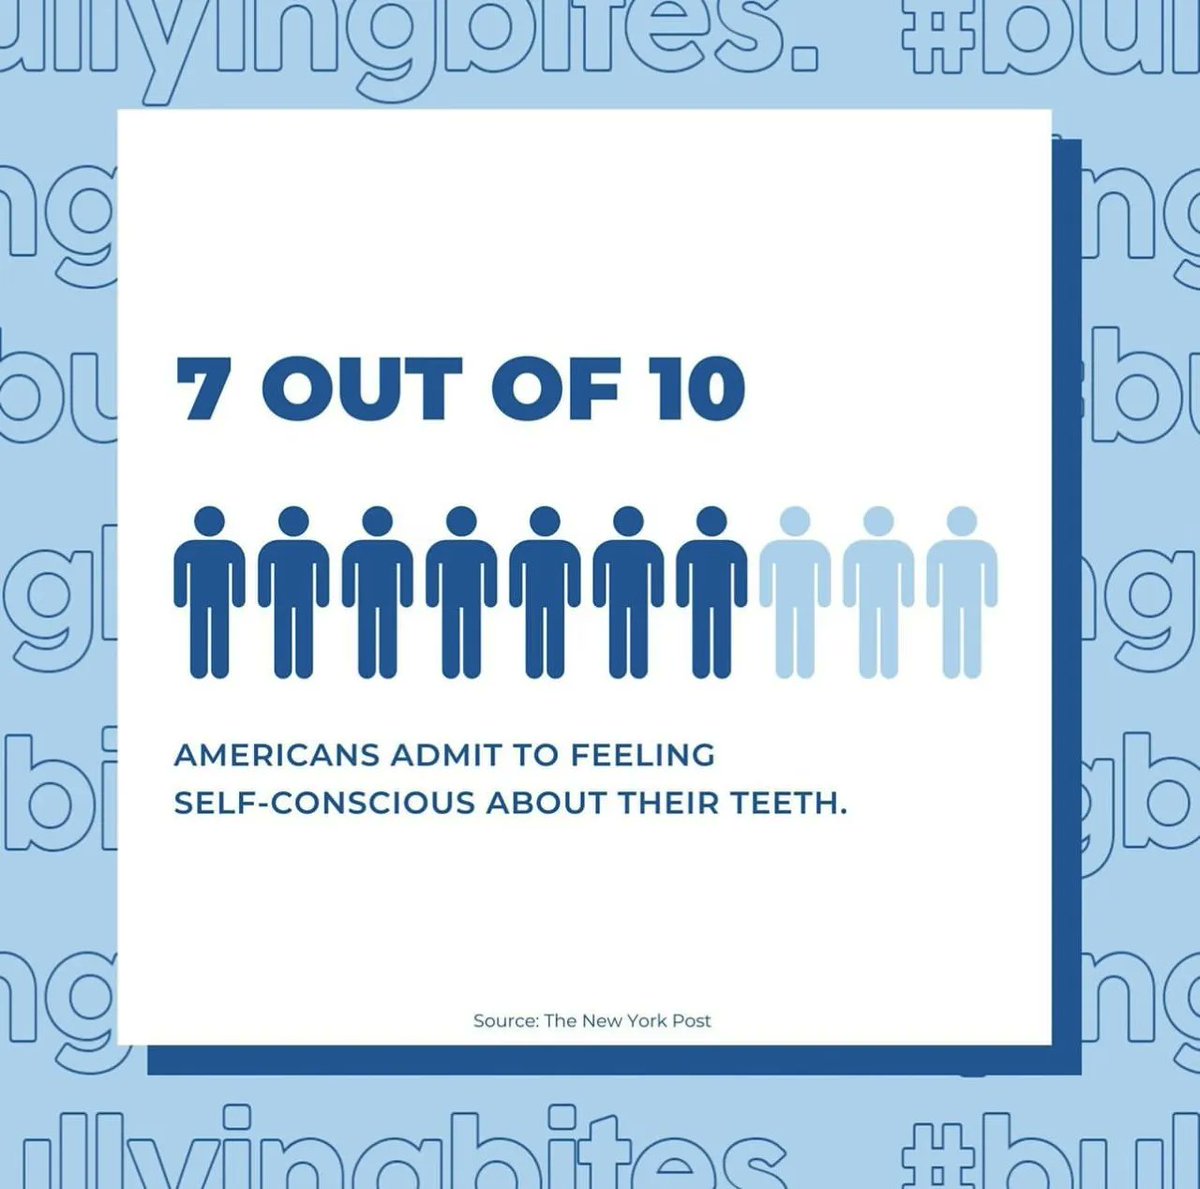 If you are one these 7... come in to our amazing office and join the 3! Book your free consult 👉  Link in bio.

Contact us 📲  (650) 342-4171

#alborziorthodontics #dralexaalborzi #orthodontics #orthodontist #bayareaorthodontics #invisalign #invisalignprovider #invisalignsmile